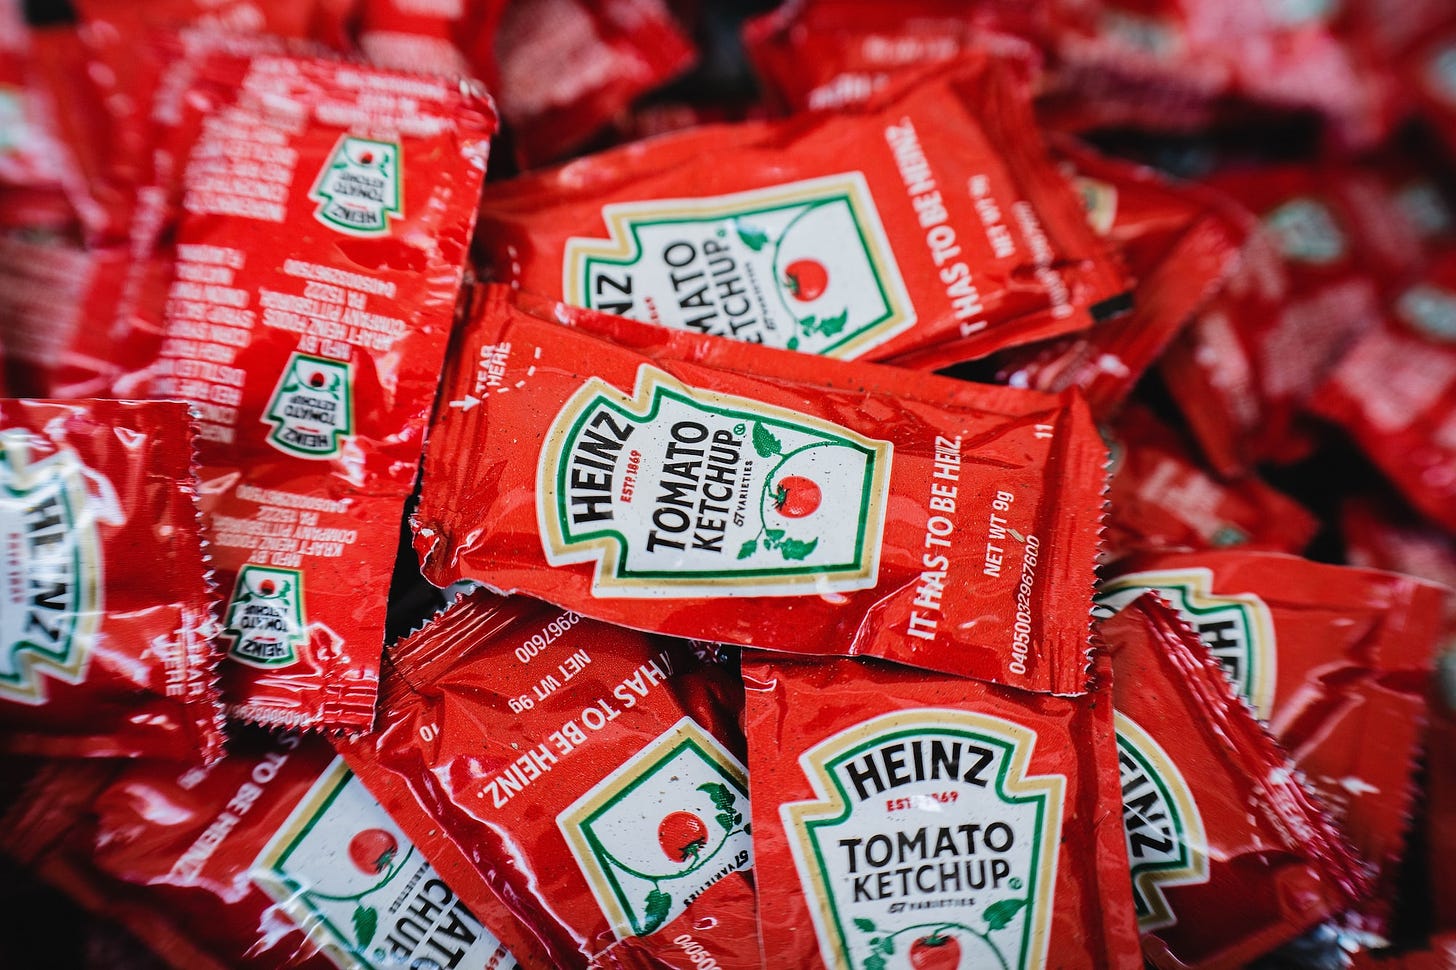 After two years of price increases, Kraft Heinz management says it's done raising prices.